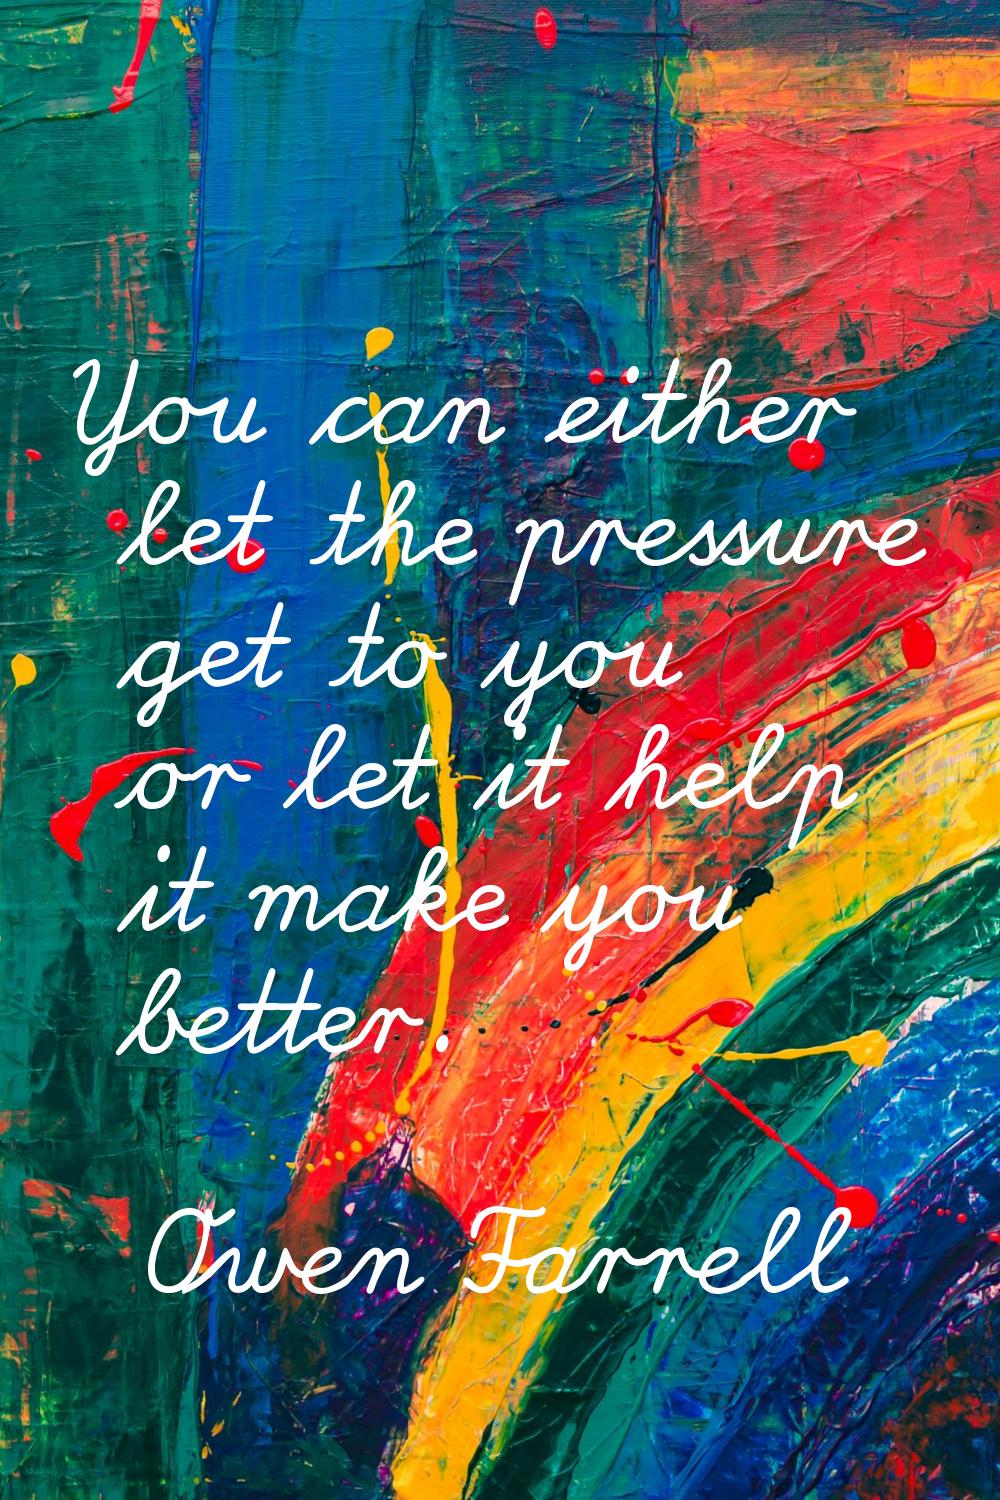 You can either let the pressure get to you or let it help it make you better.